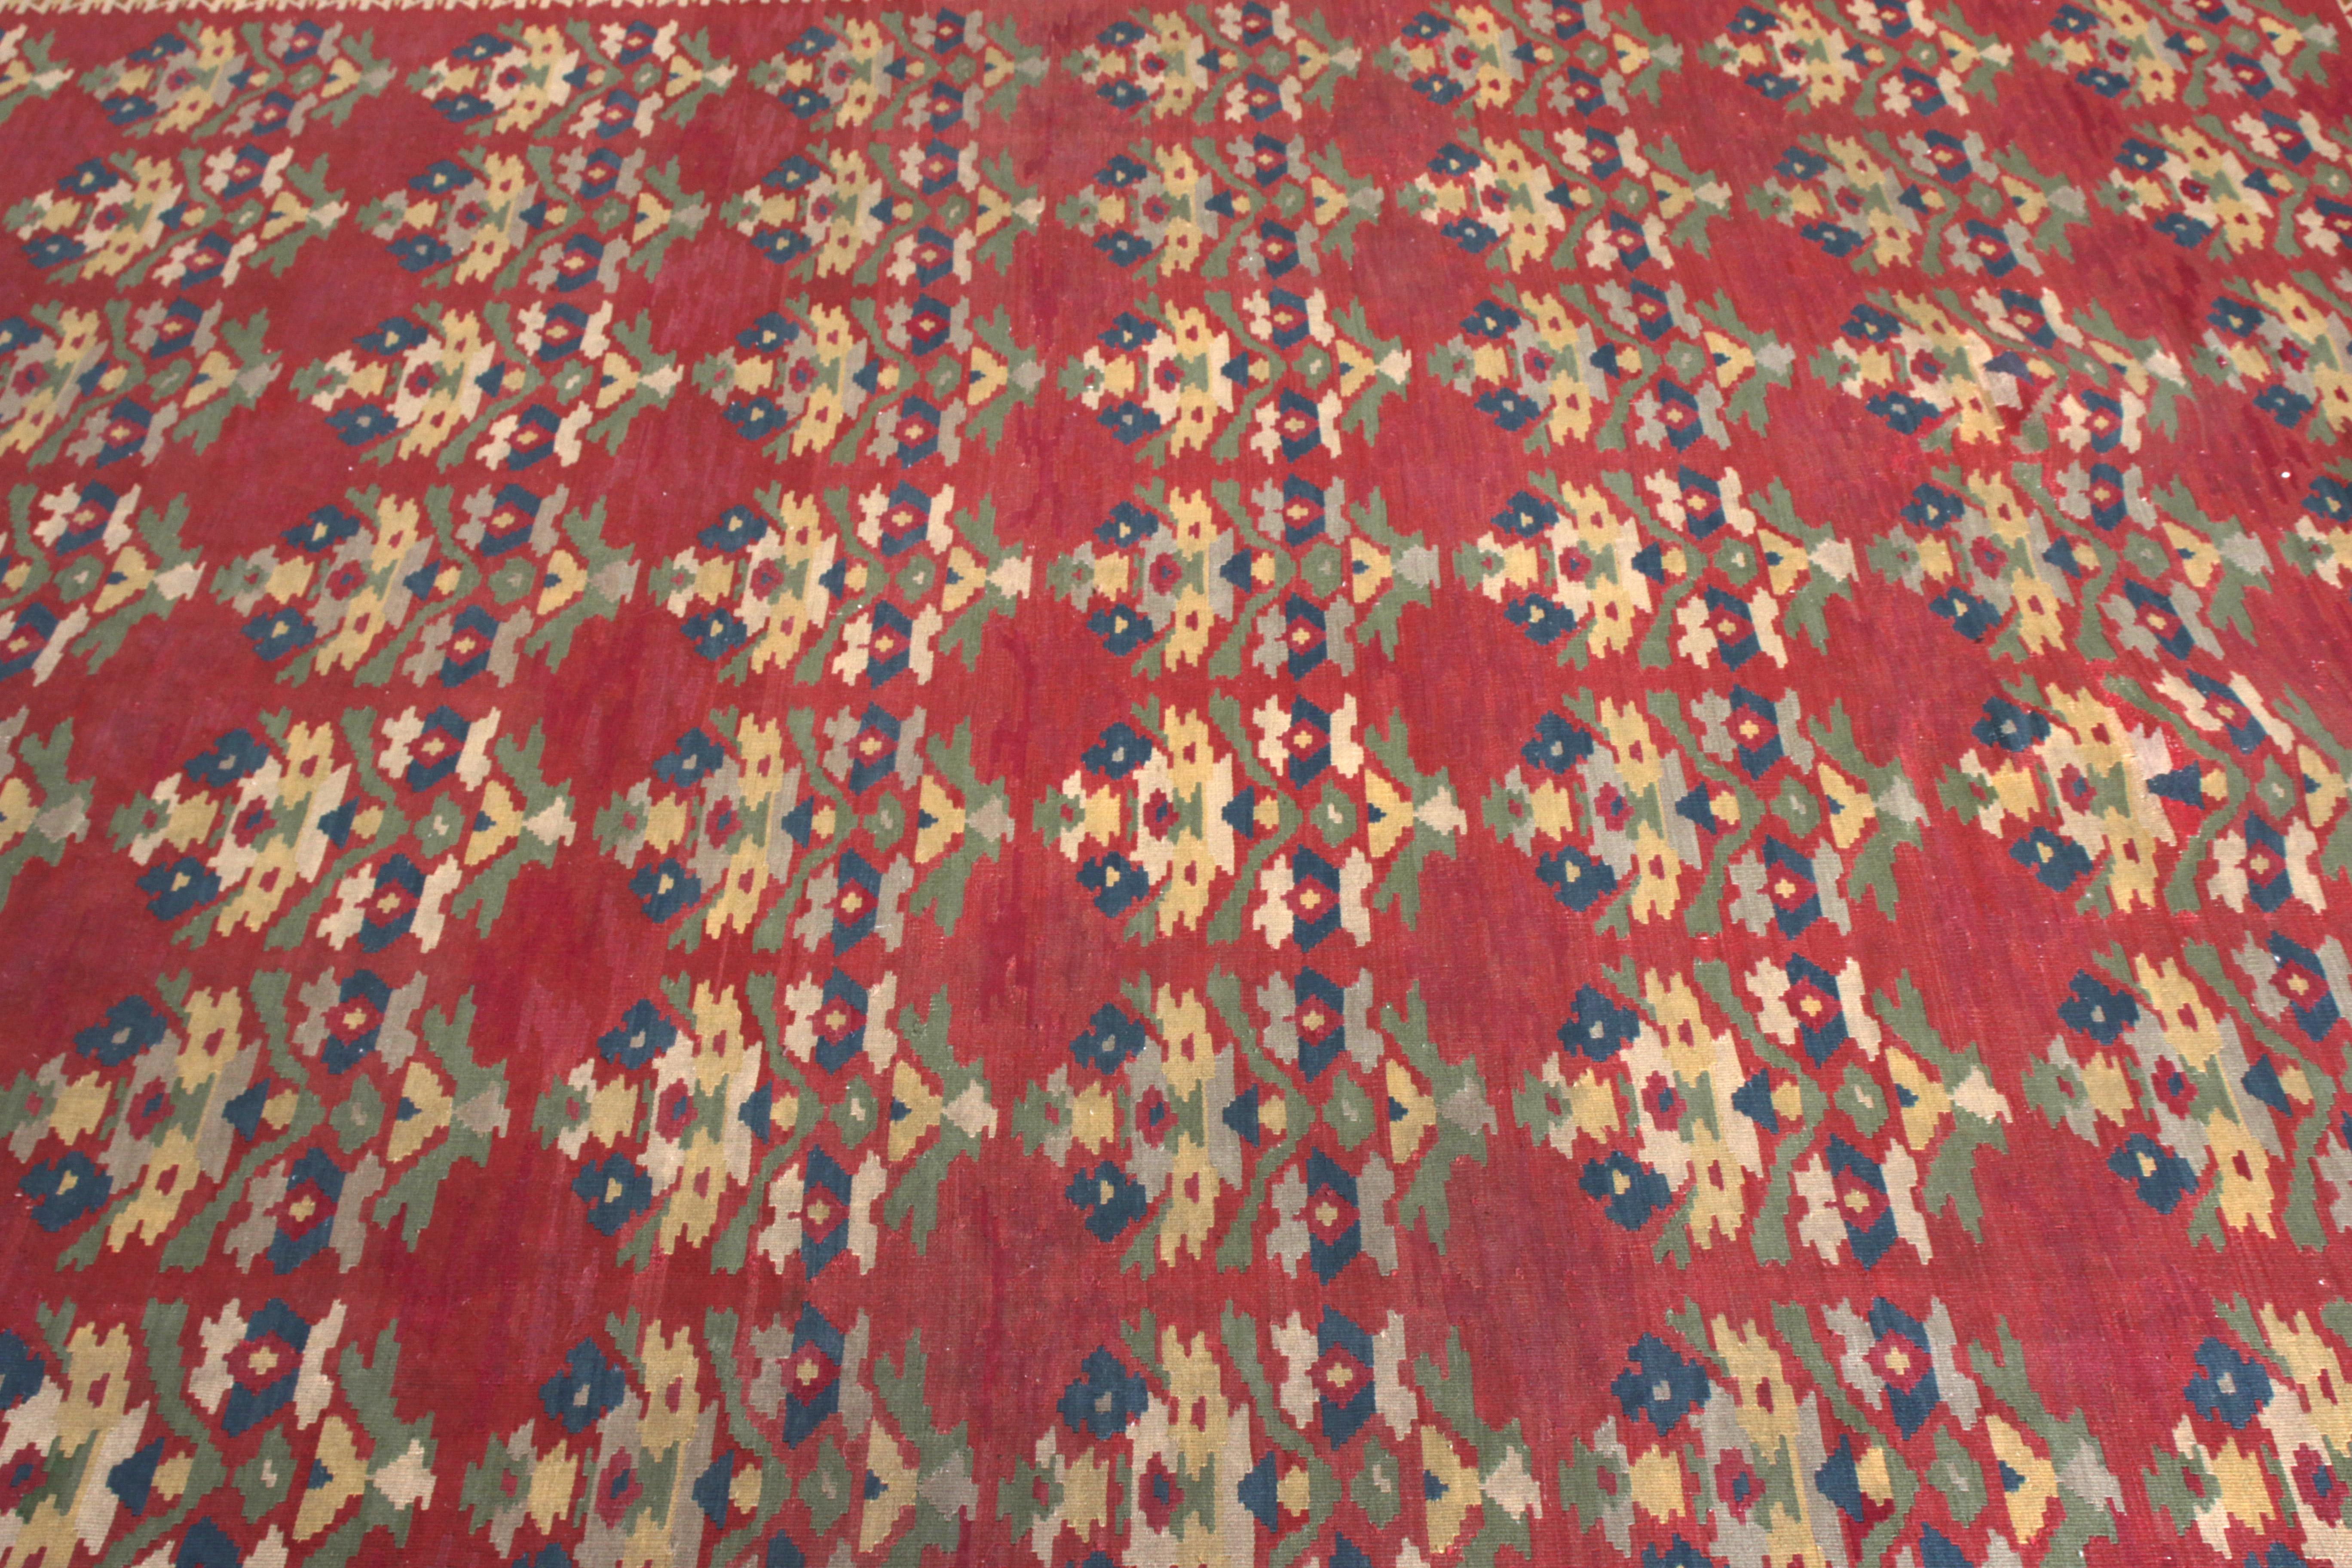 Hand-Woven Rug & Kilim's Handwoven Vintage Midcentury Kilim Rug in Red All-Over Pattern For Sale